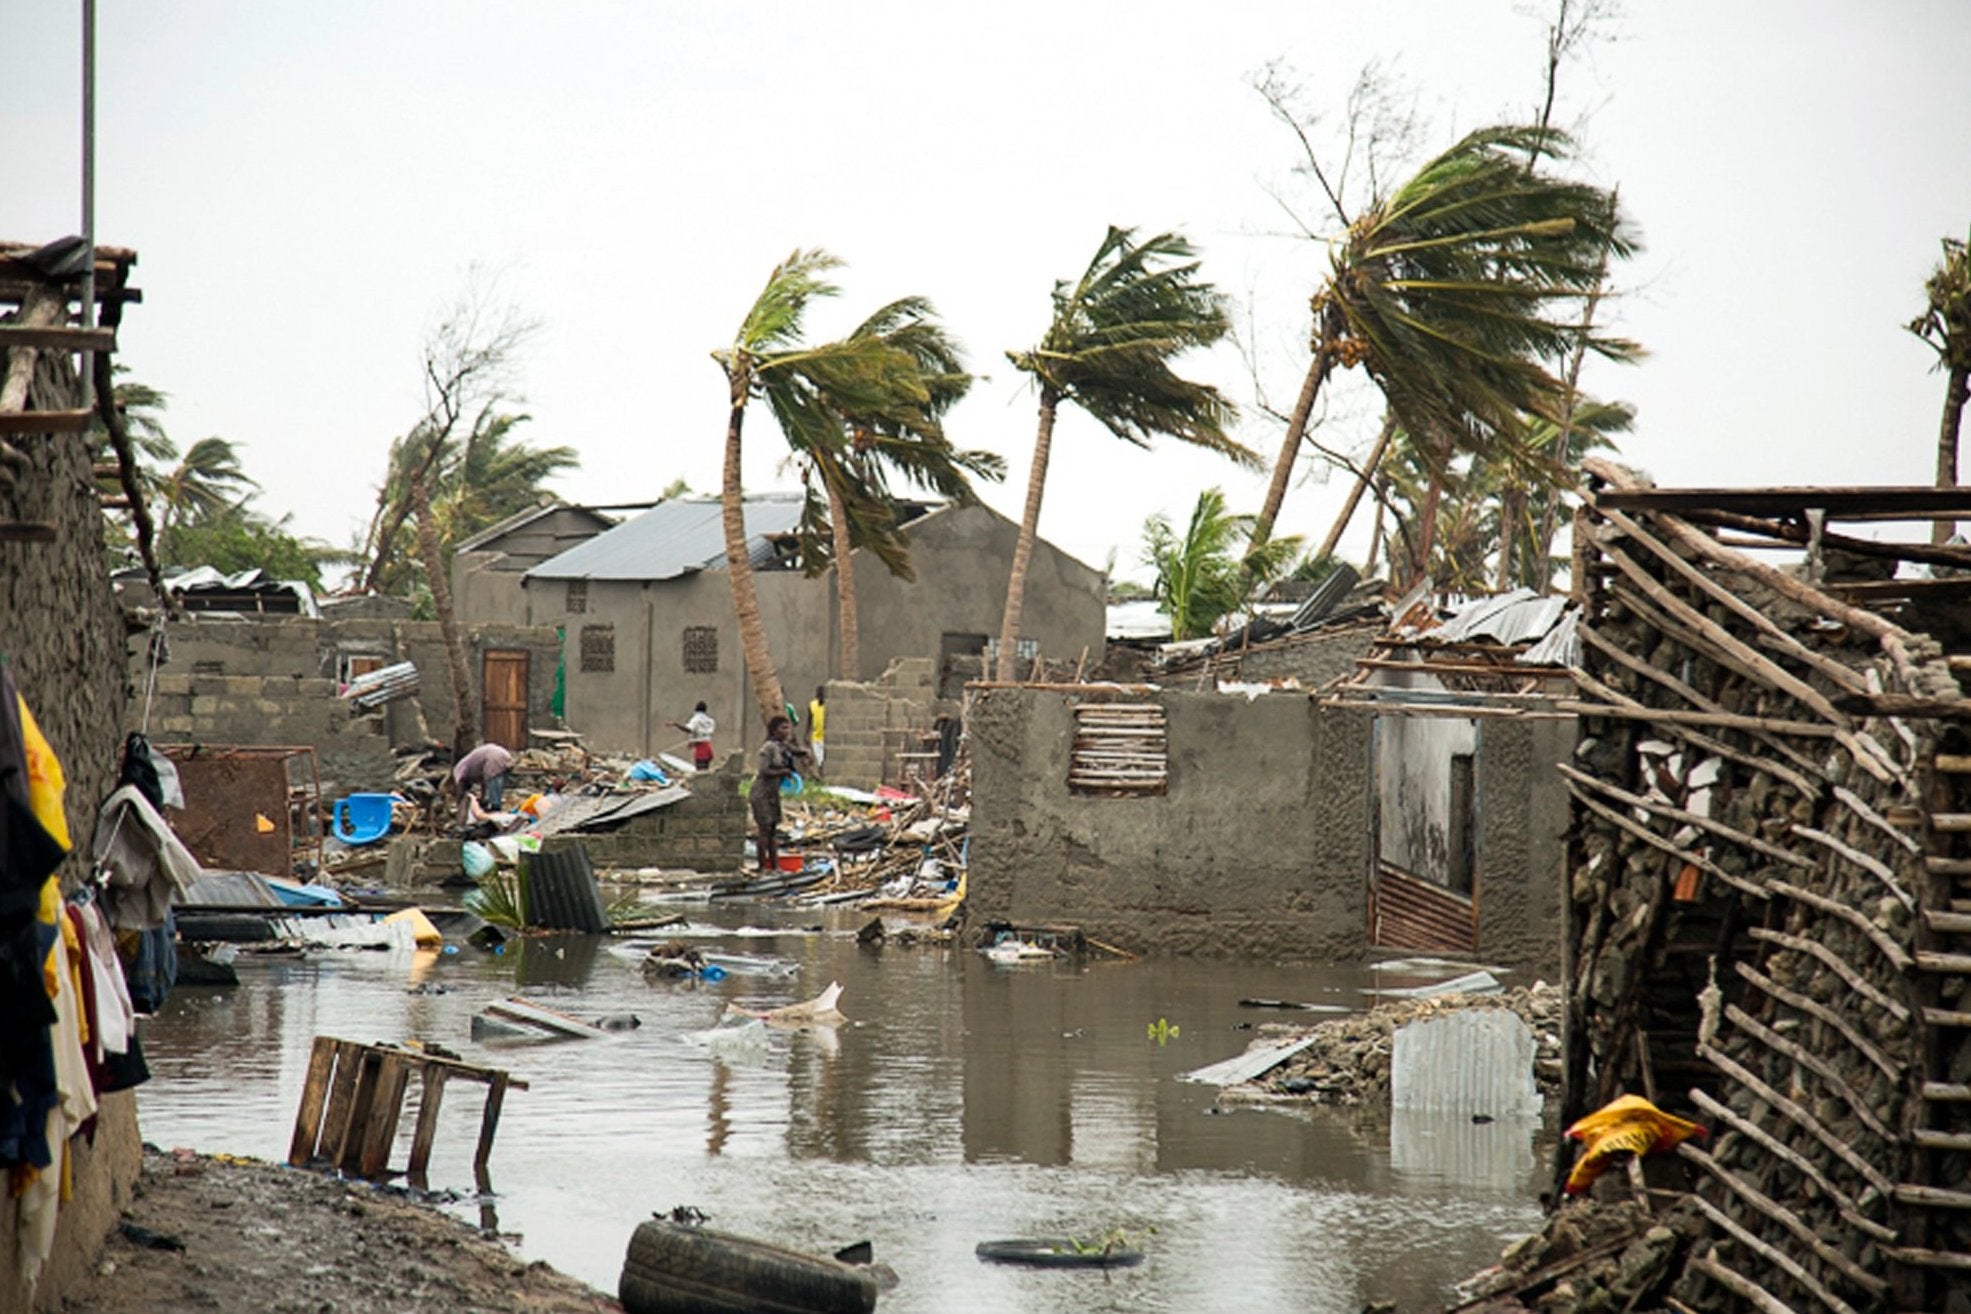 Damage is seen after Tropical Cyclone Idai, in Beira, Mozambique